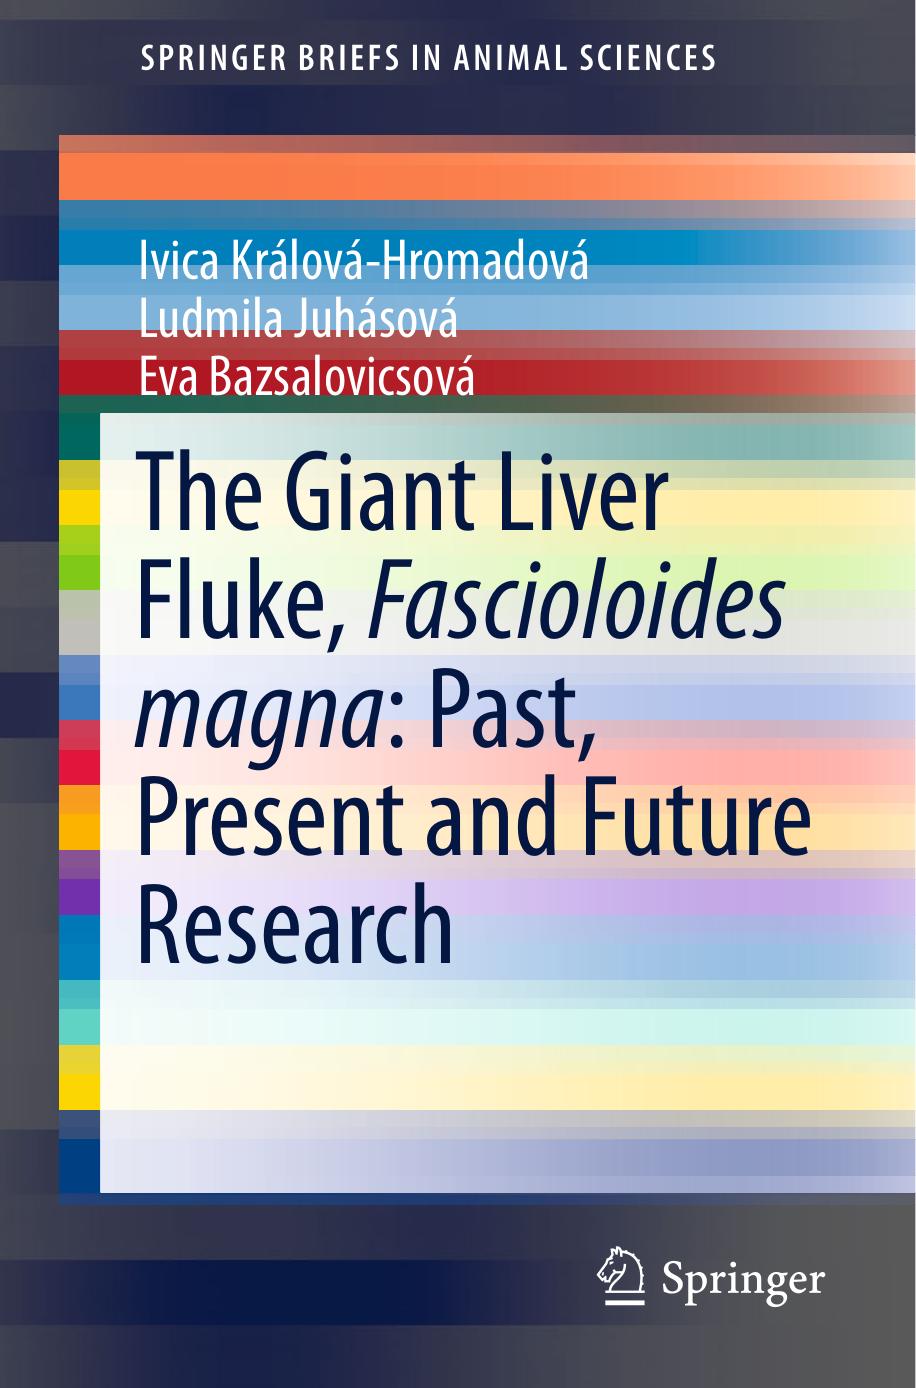 The Giant Liver Fluke, Fascioloides Magna - Past, Present and Future Research